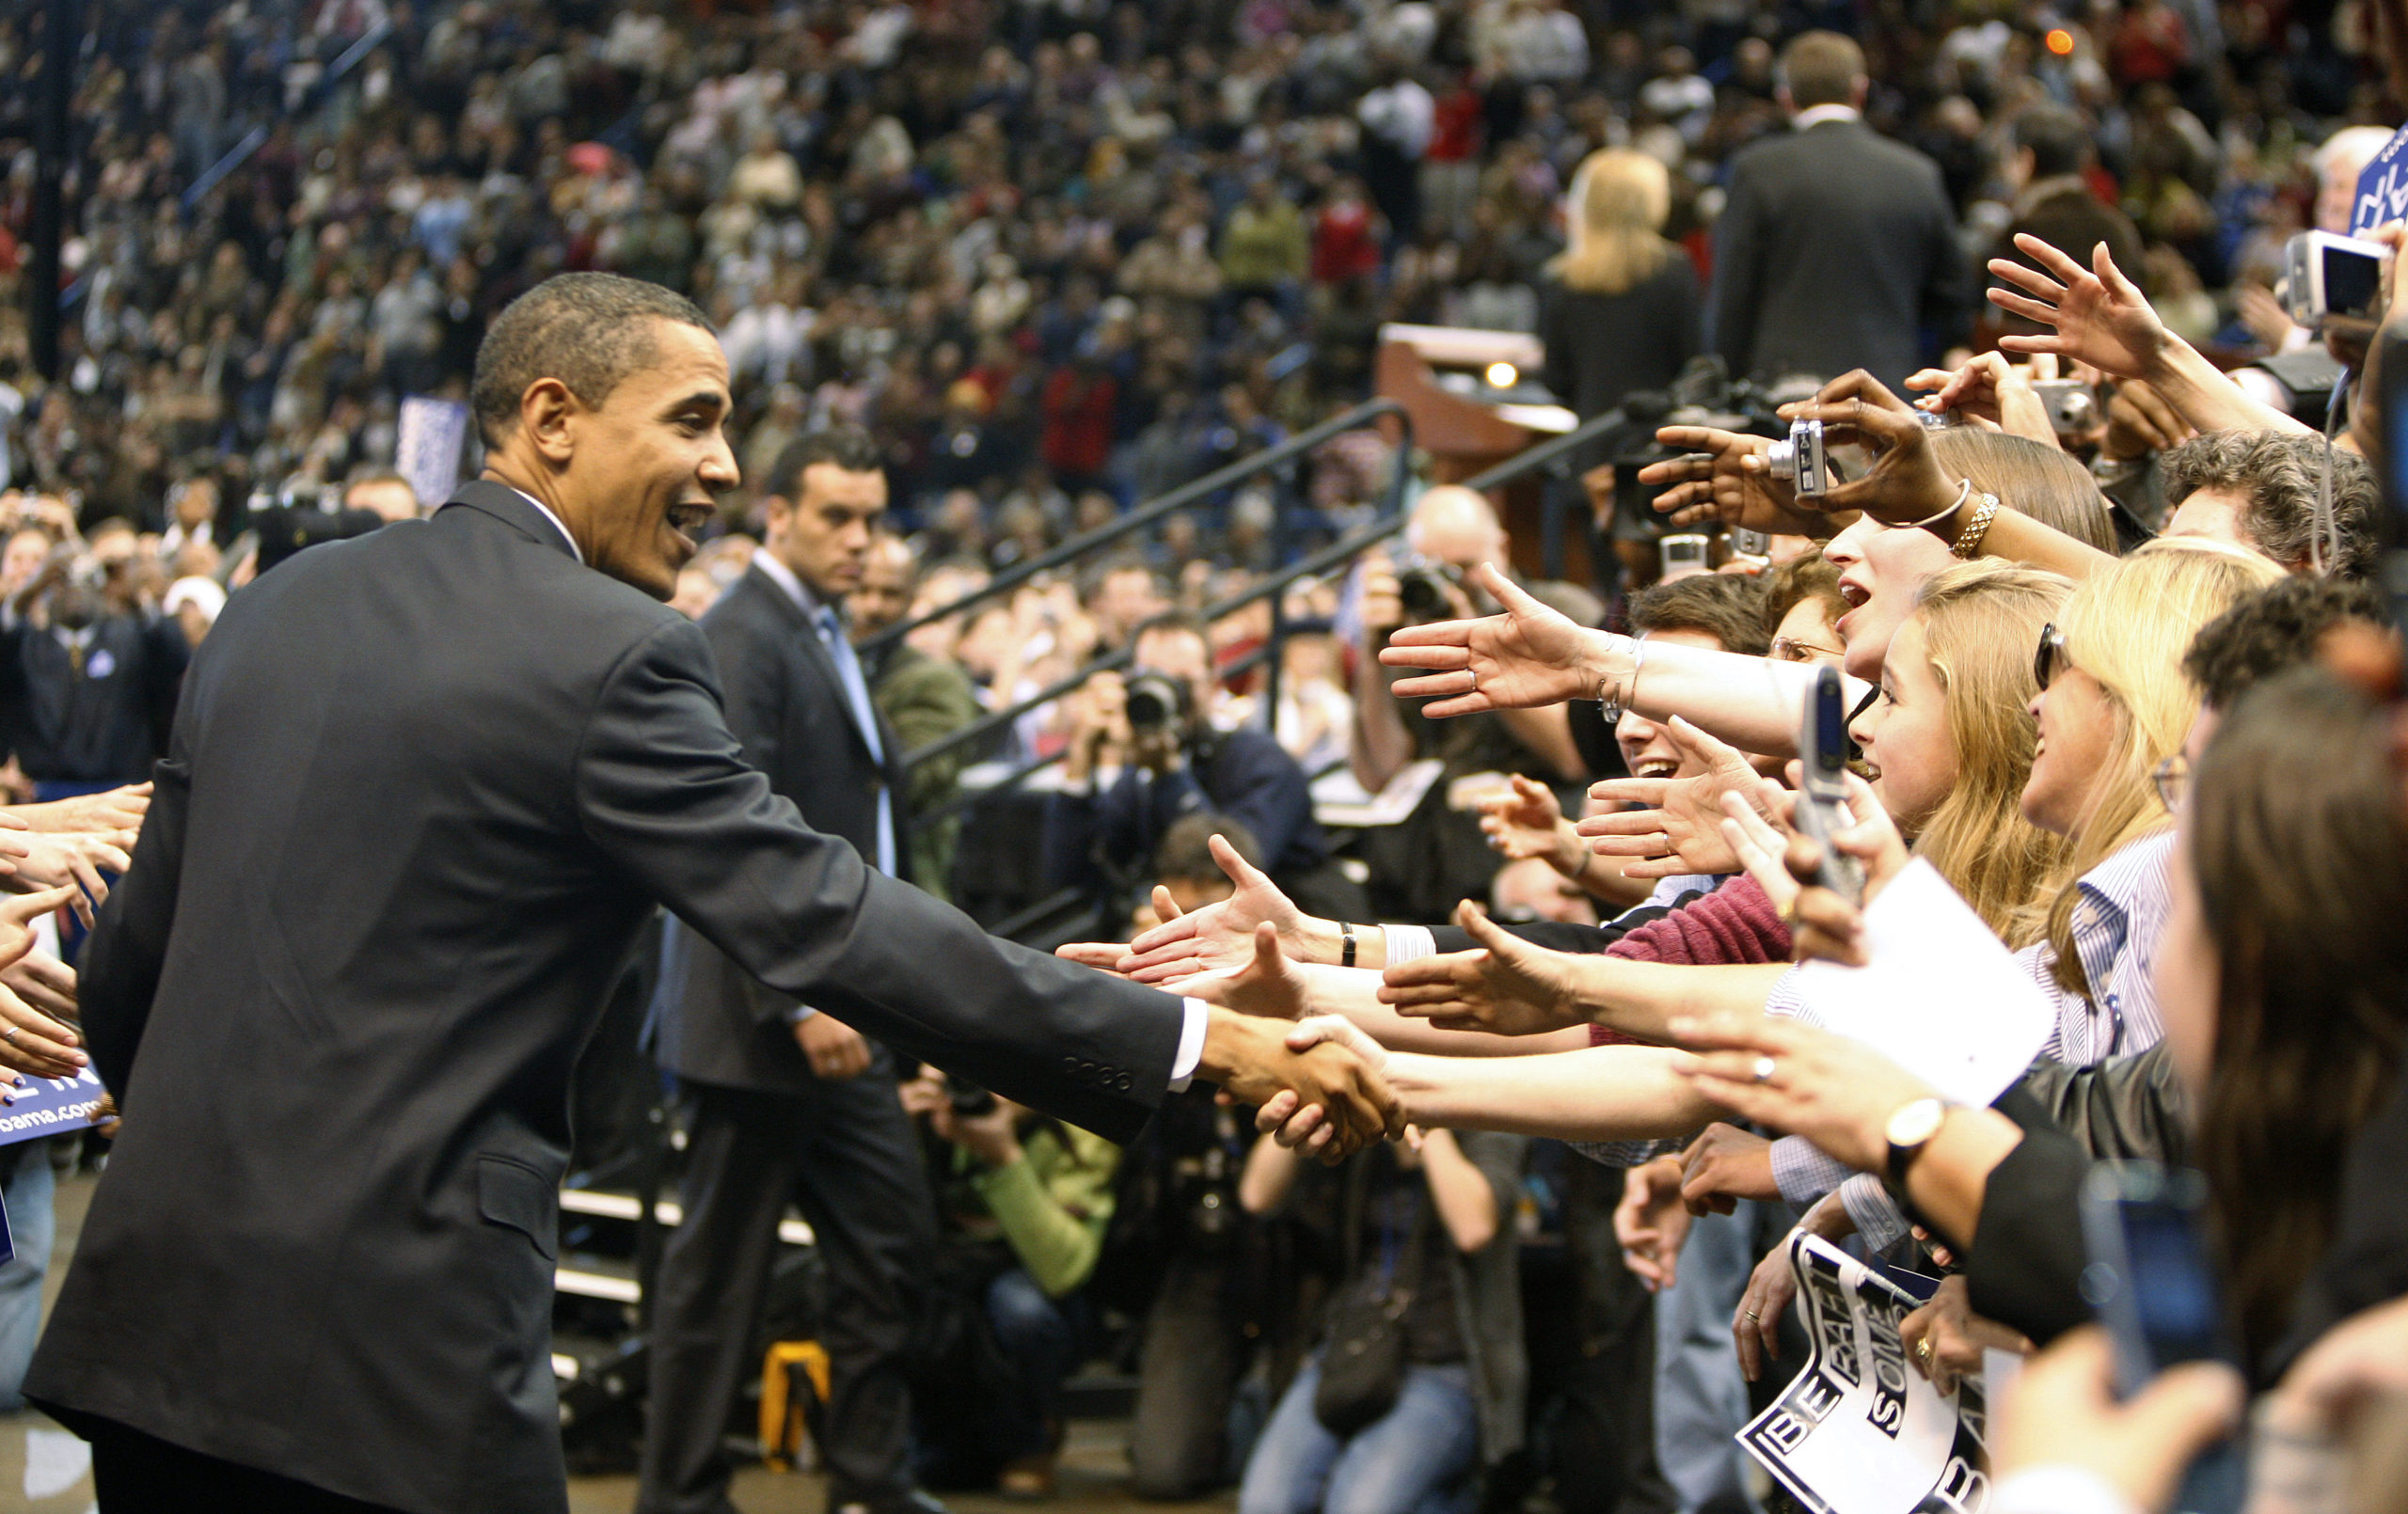 Obama with supporters